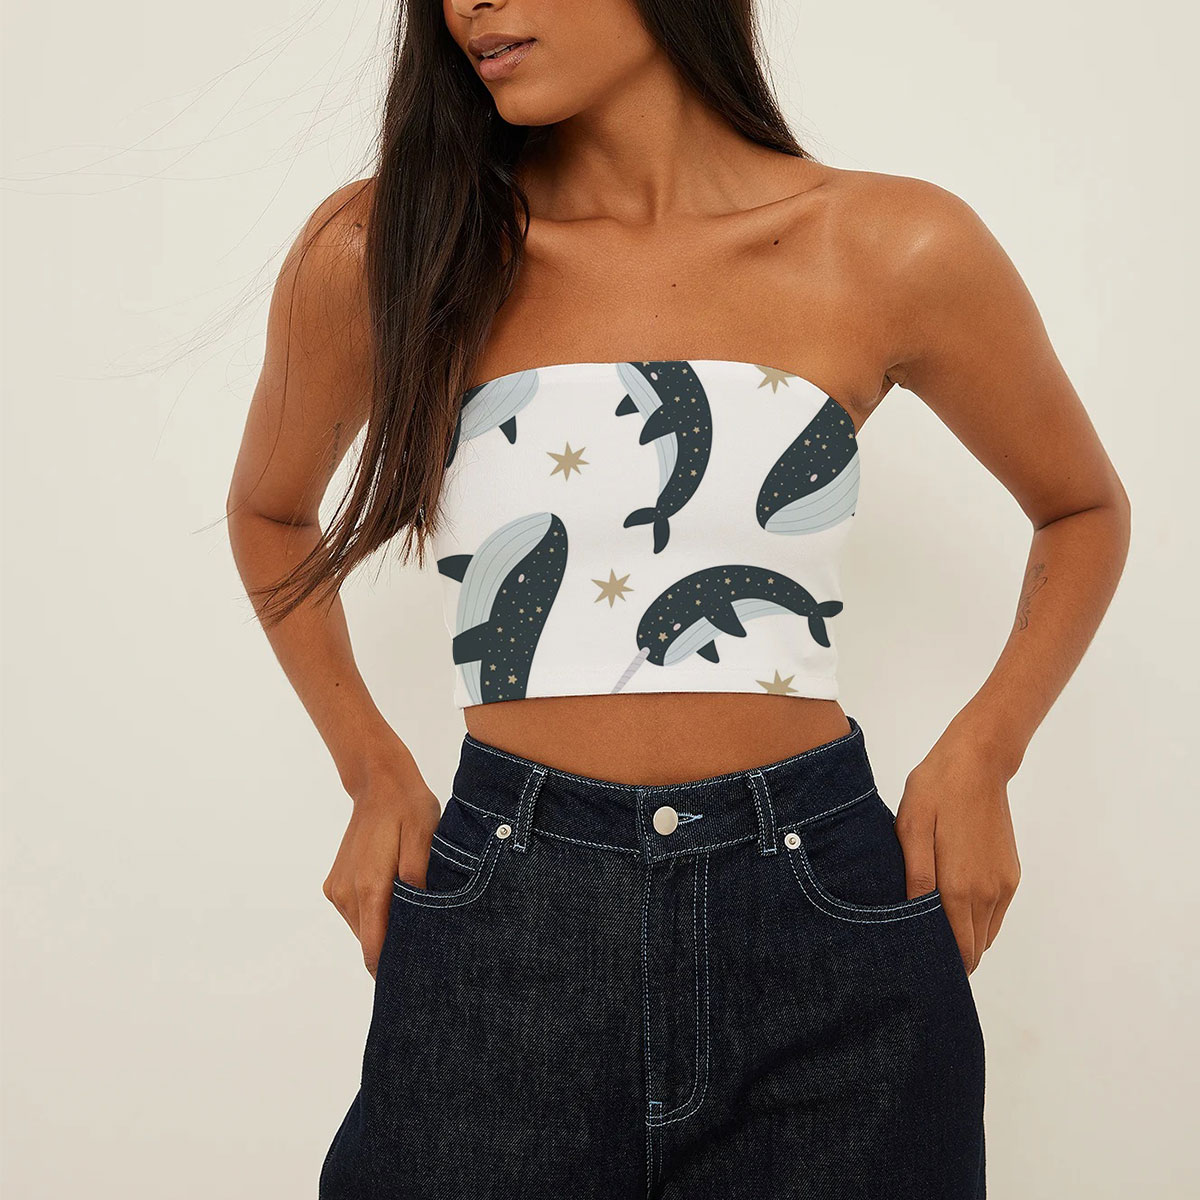 Star Narhwhal Whale Tube Top